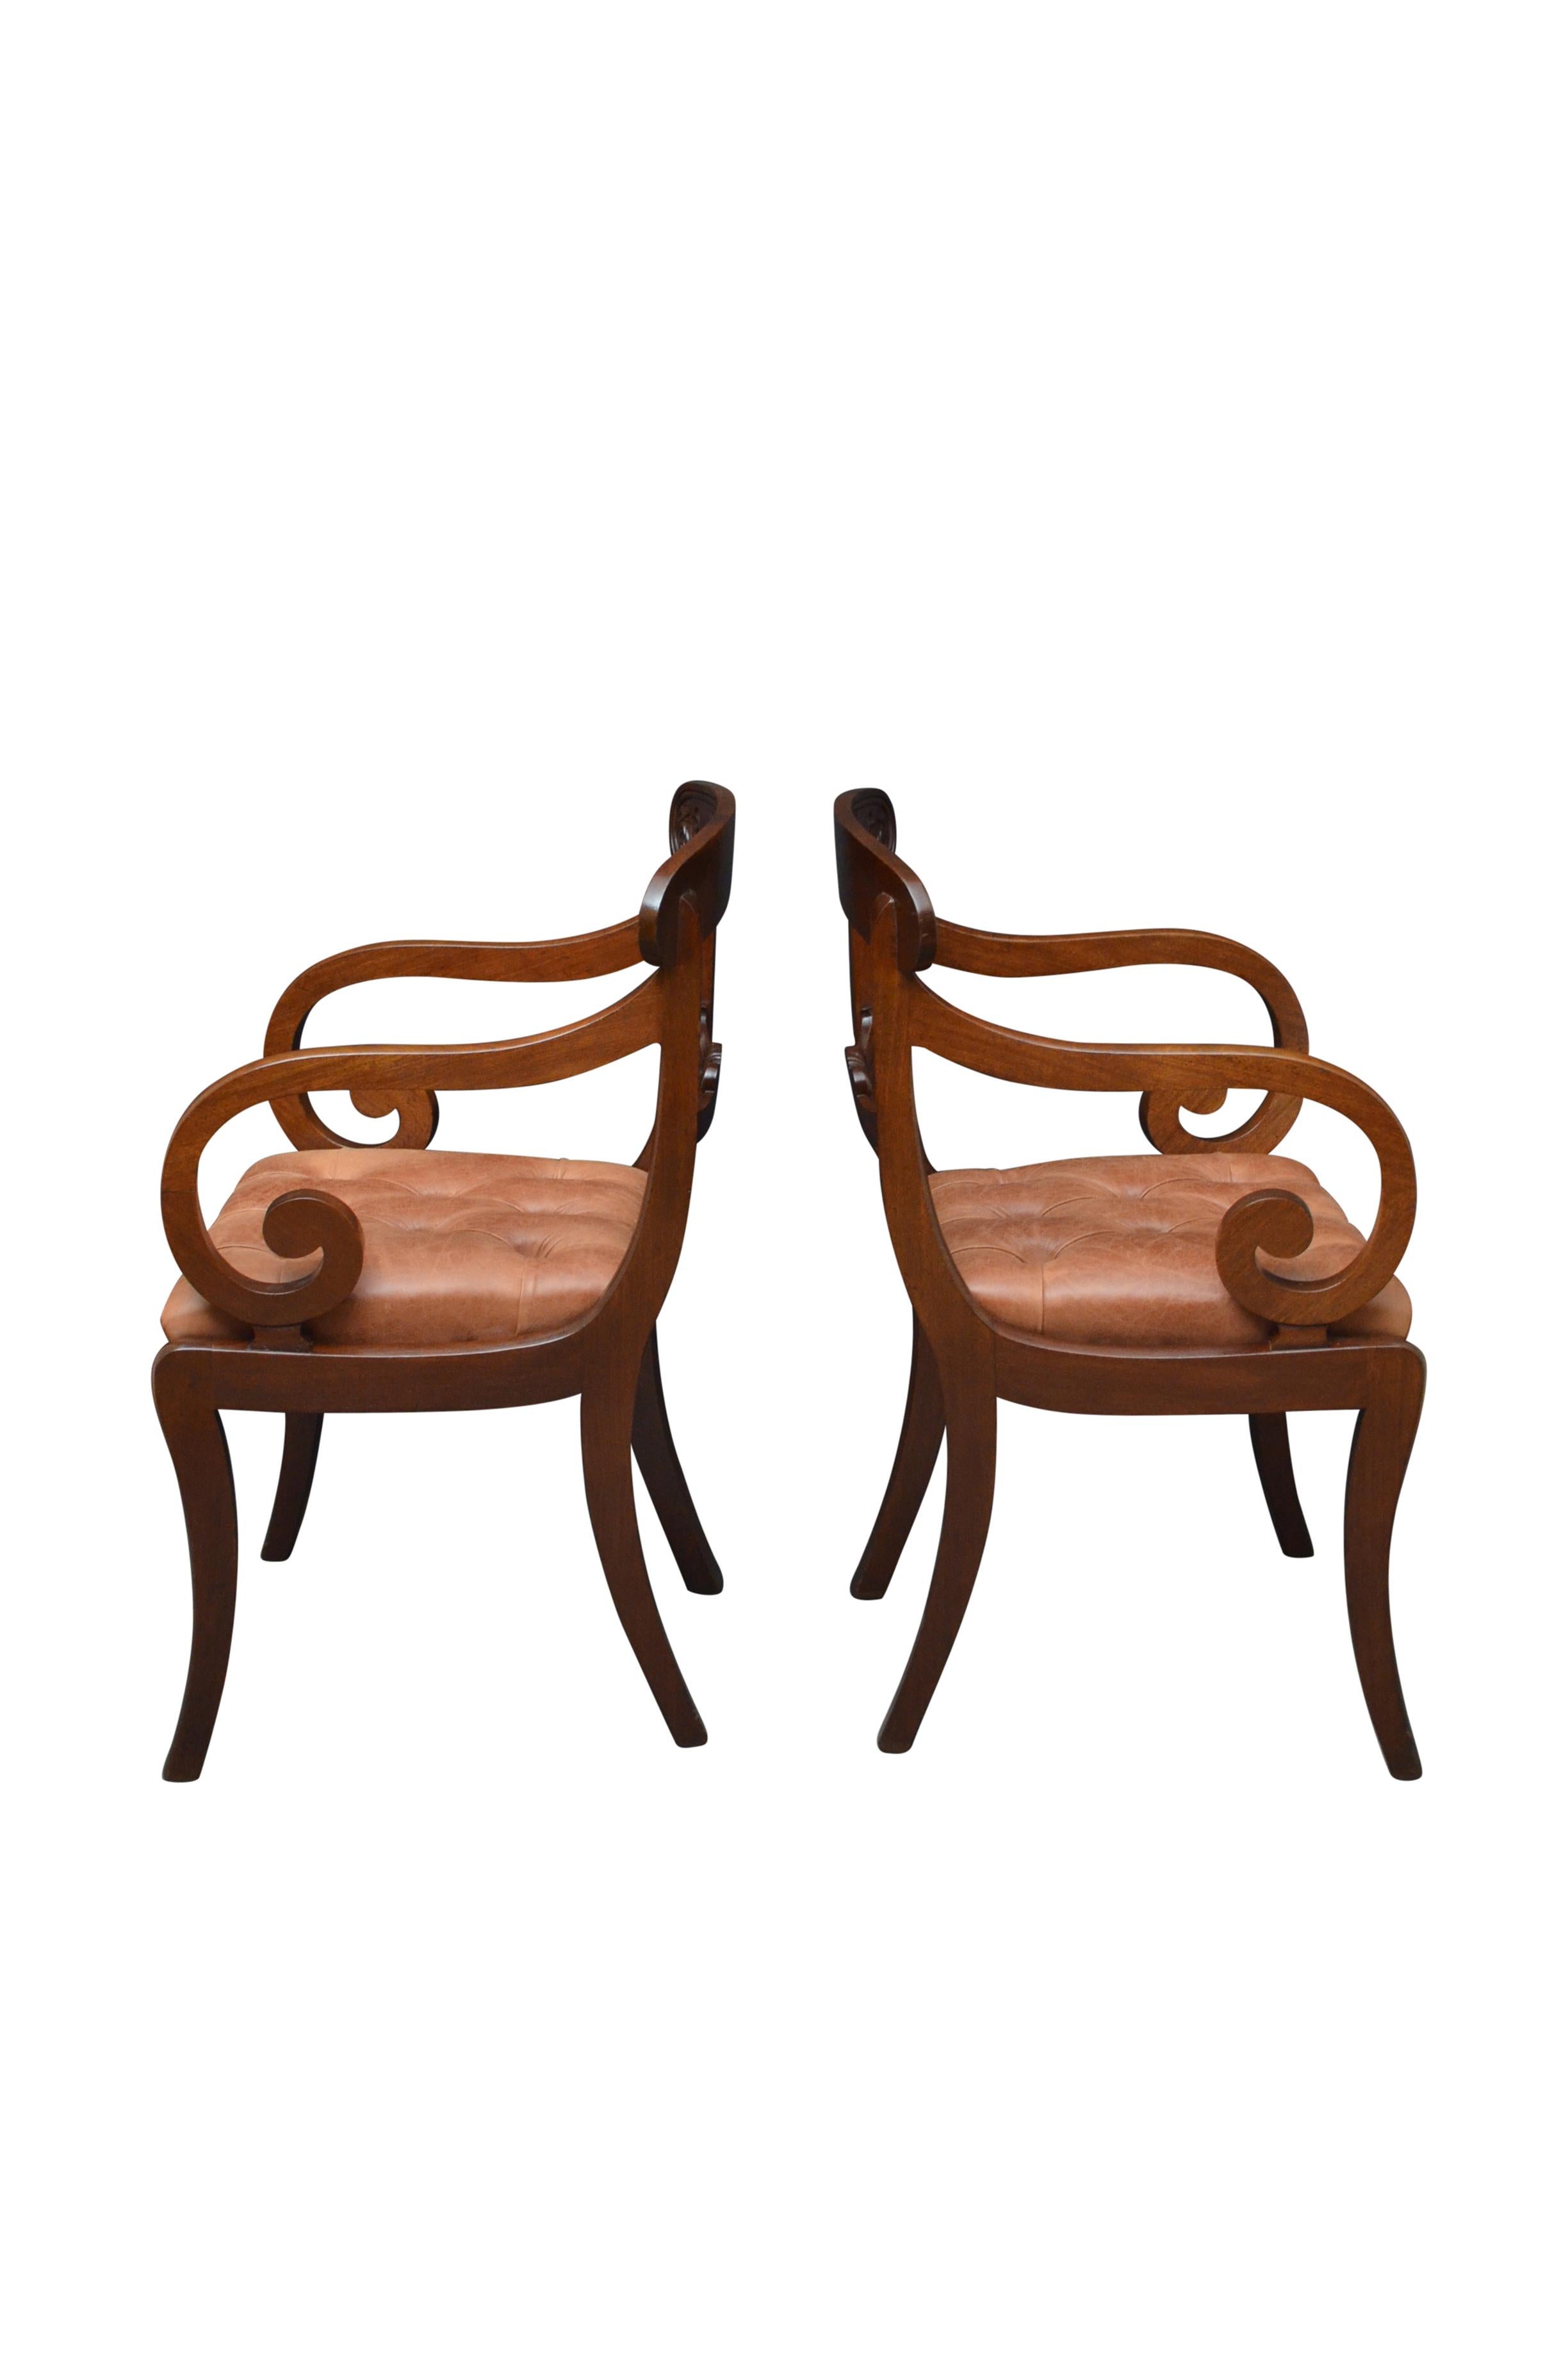 Pair of William IV Mahogany Carver Chairs Desk Chair Office Chair 2